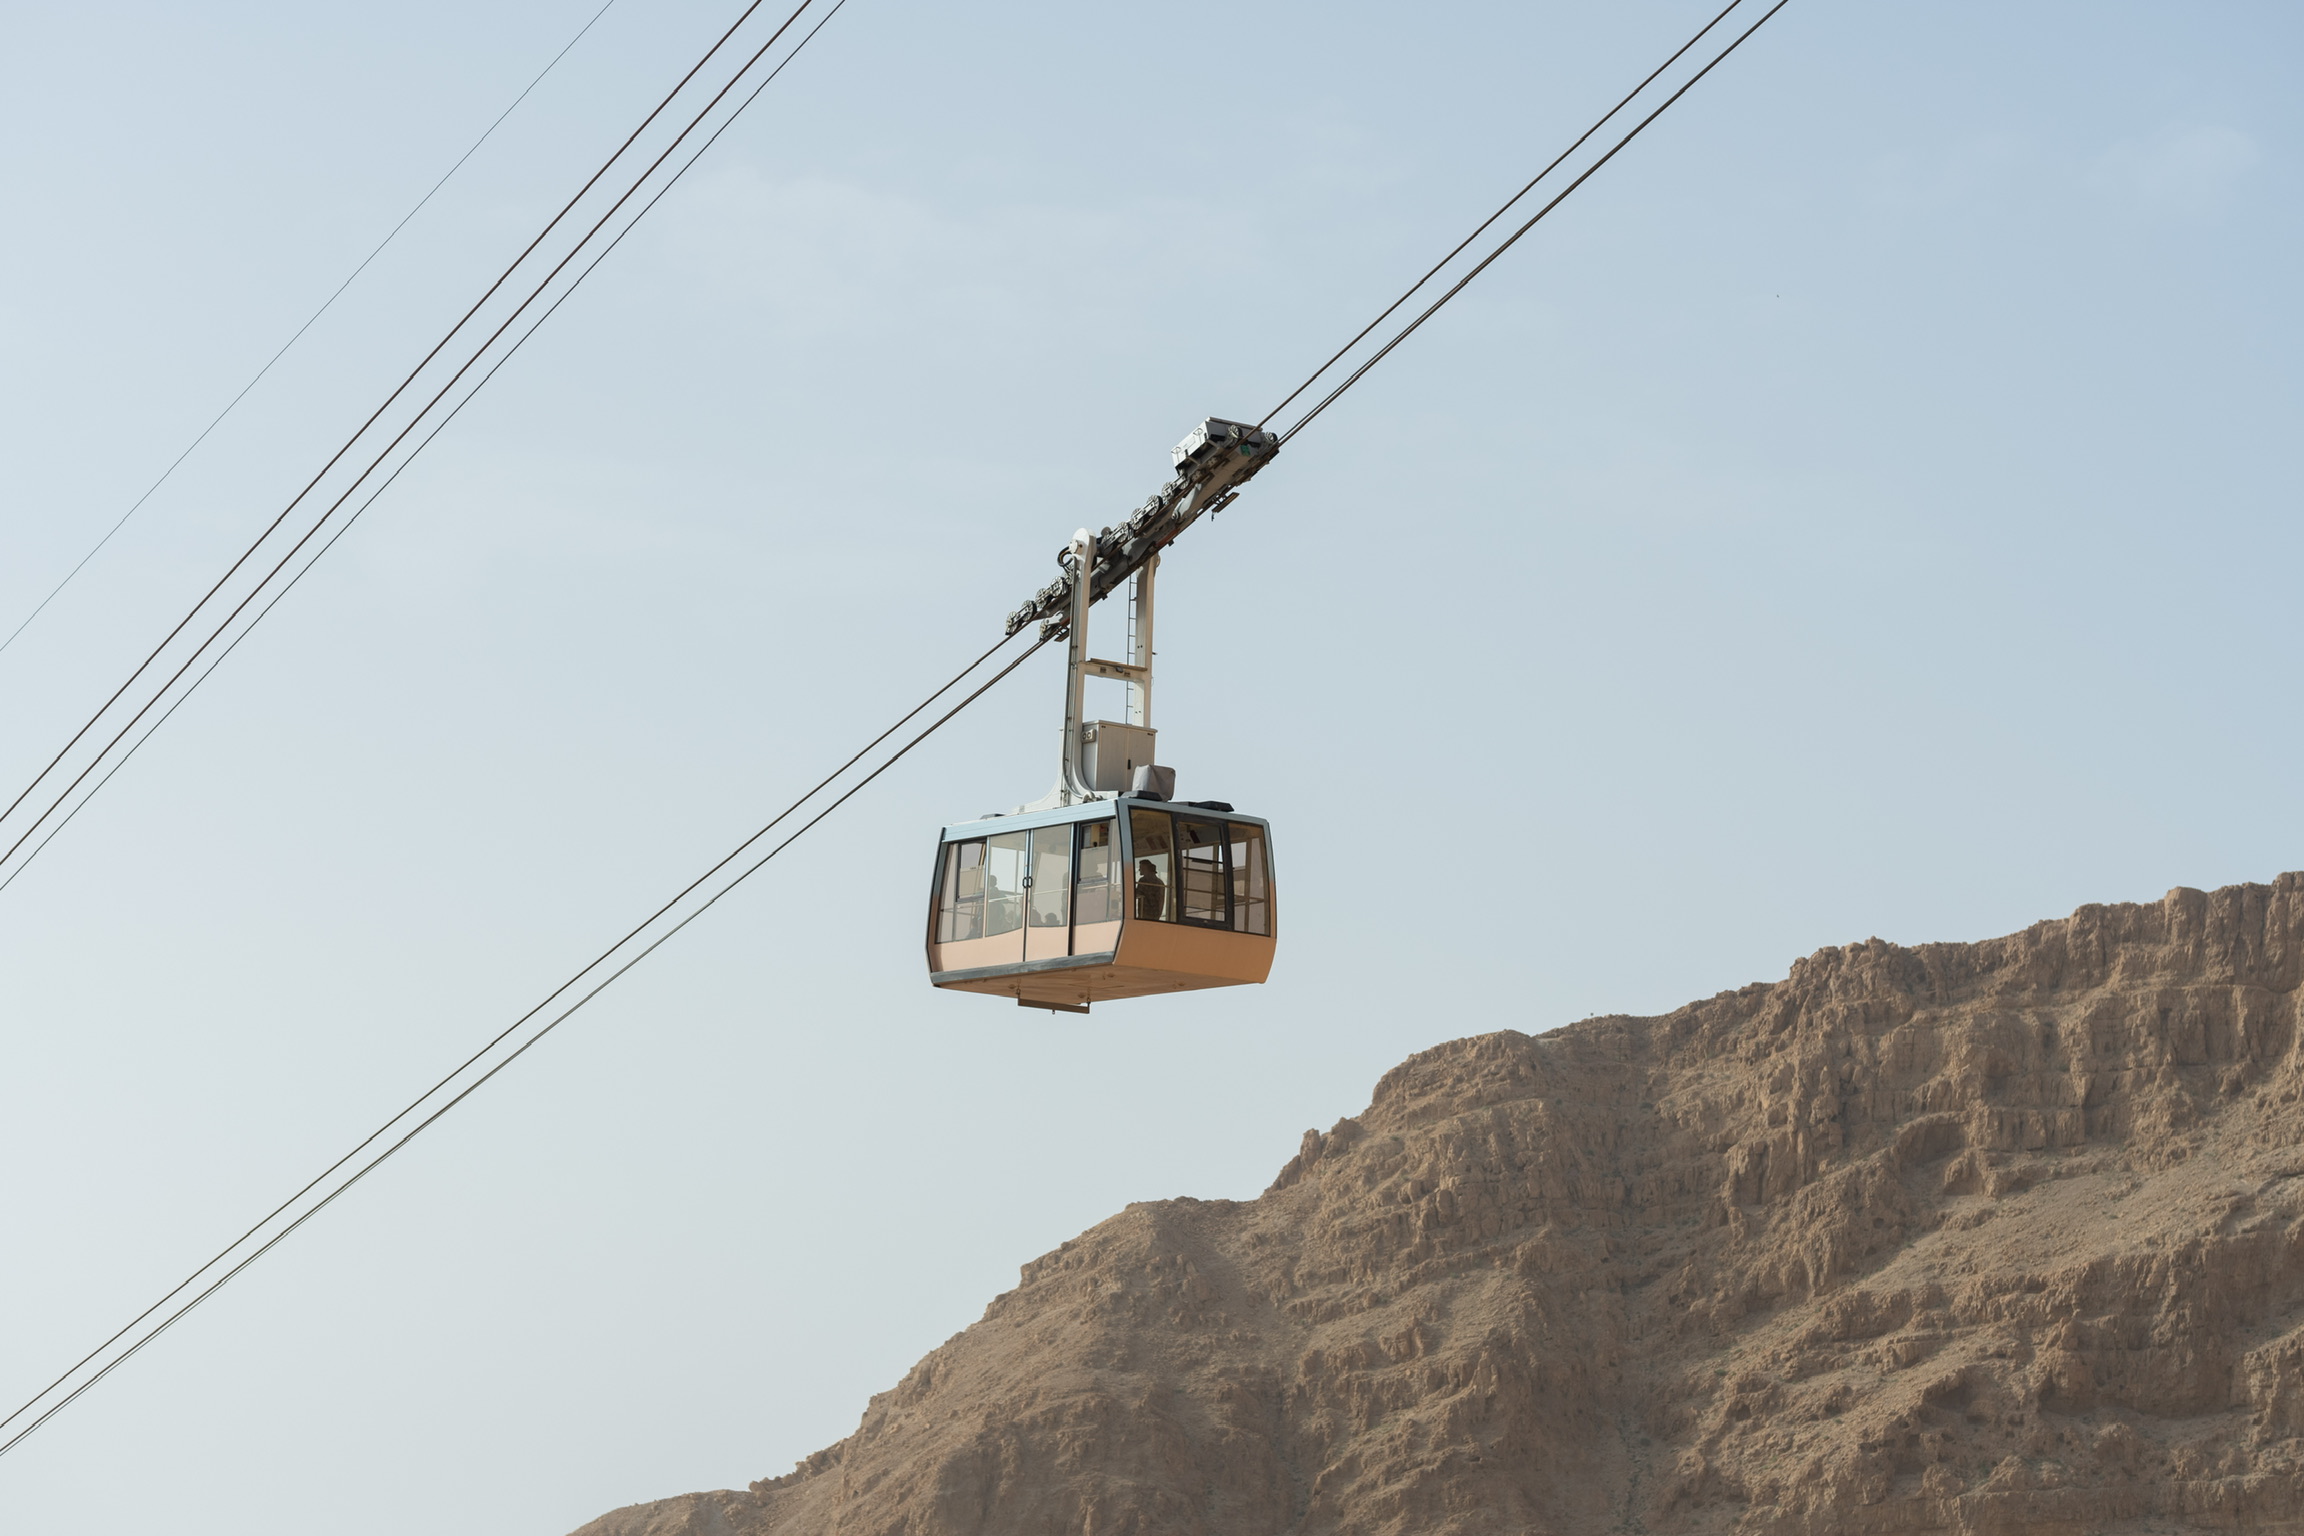 planning a trip to the middle east, where to go in the middle east, how to plan a trip to the middle east, Masada National Park, Israel, erin busbee, busbee style, busbee family travels, Masada National Park trip, snake path, hiking in masada, hiking the snake path, cable car